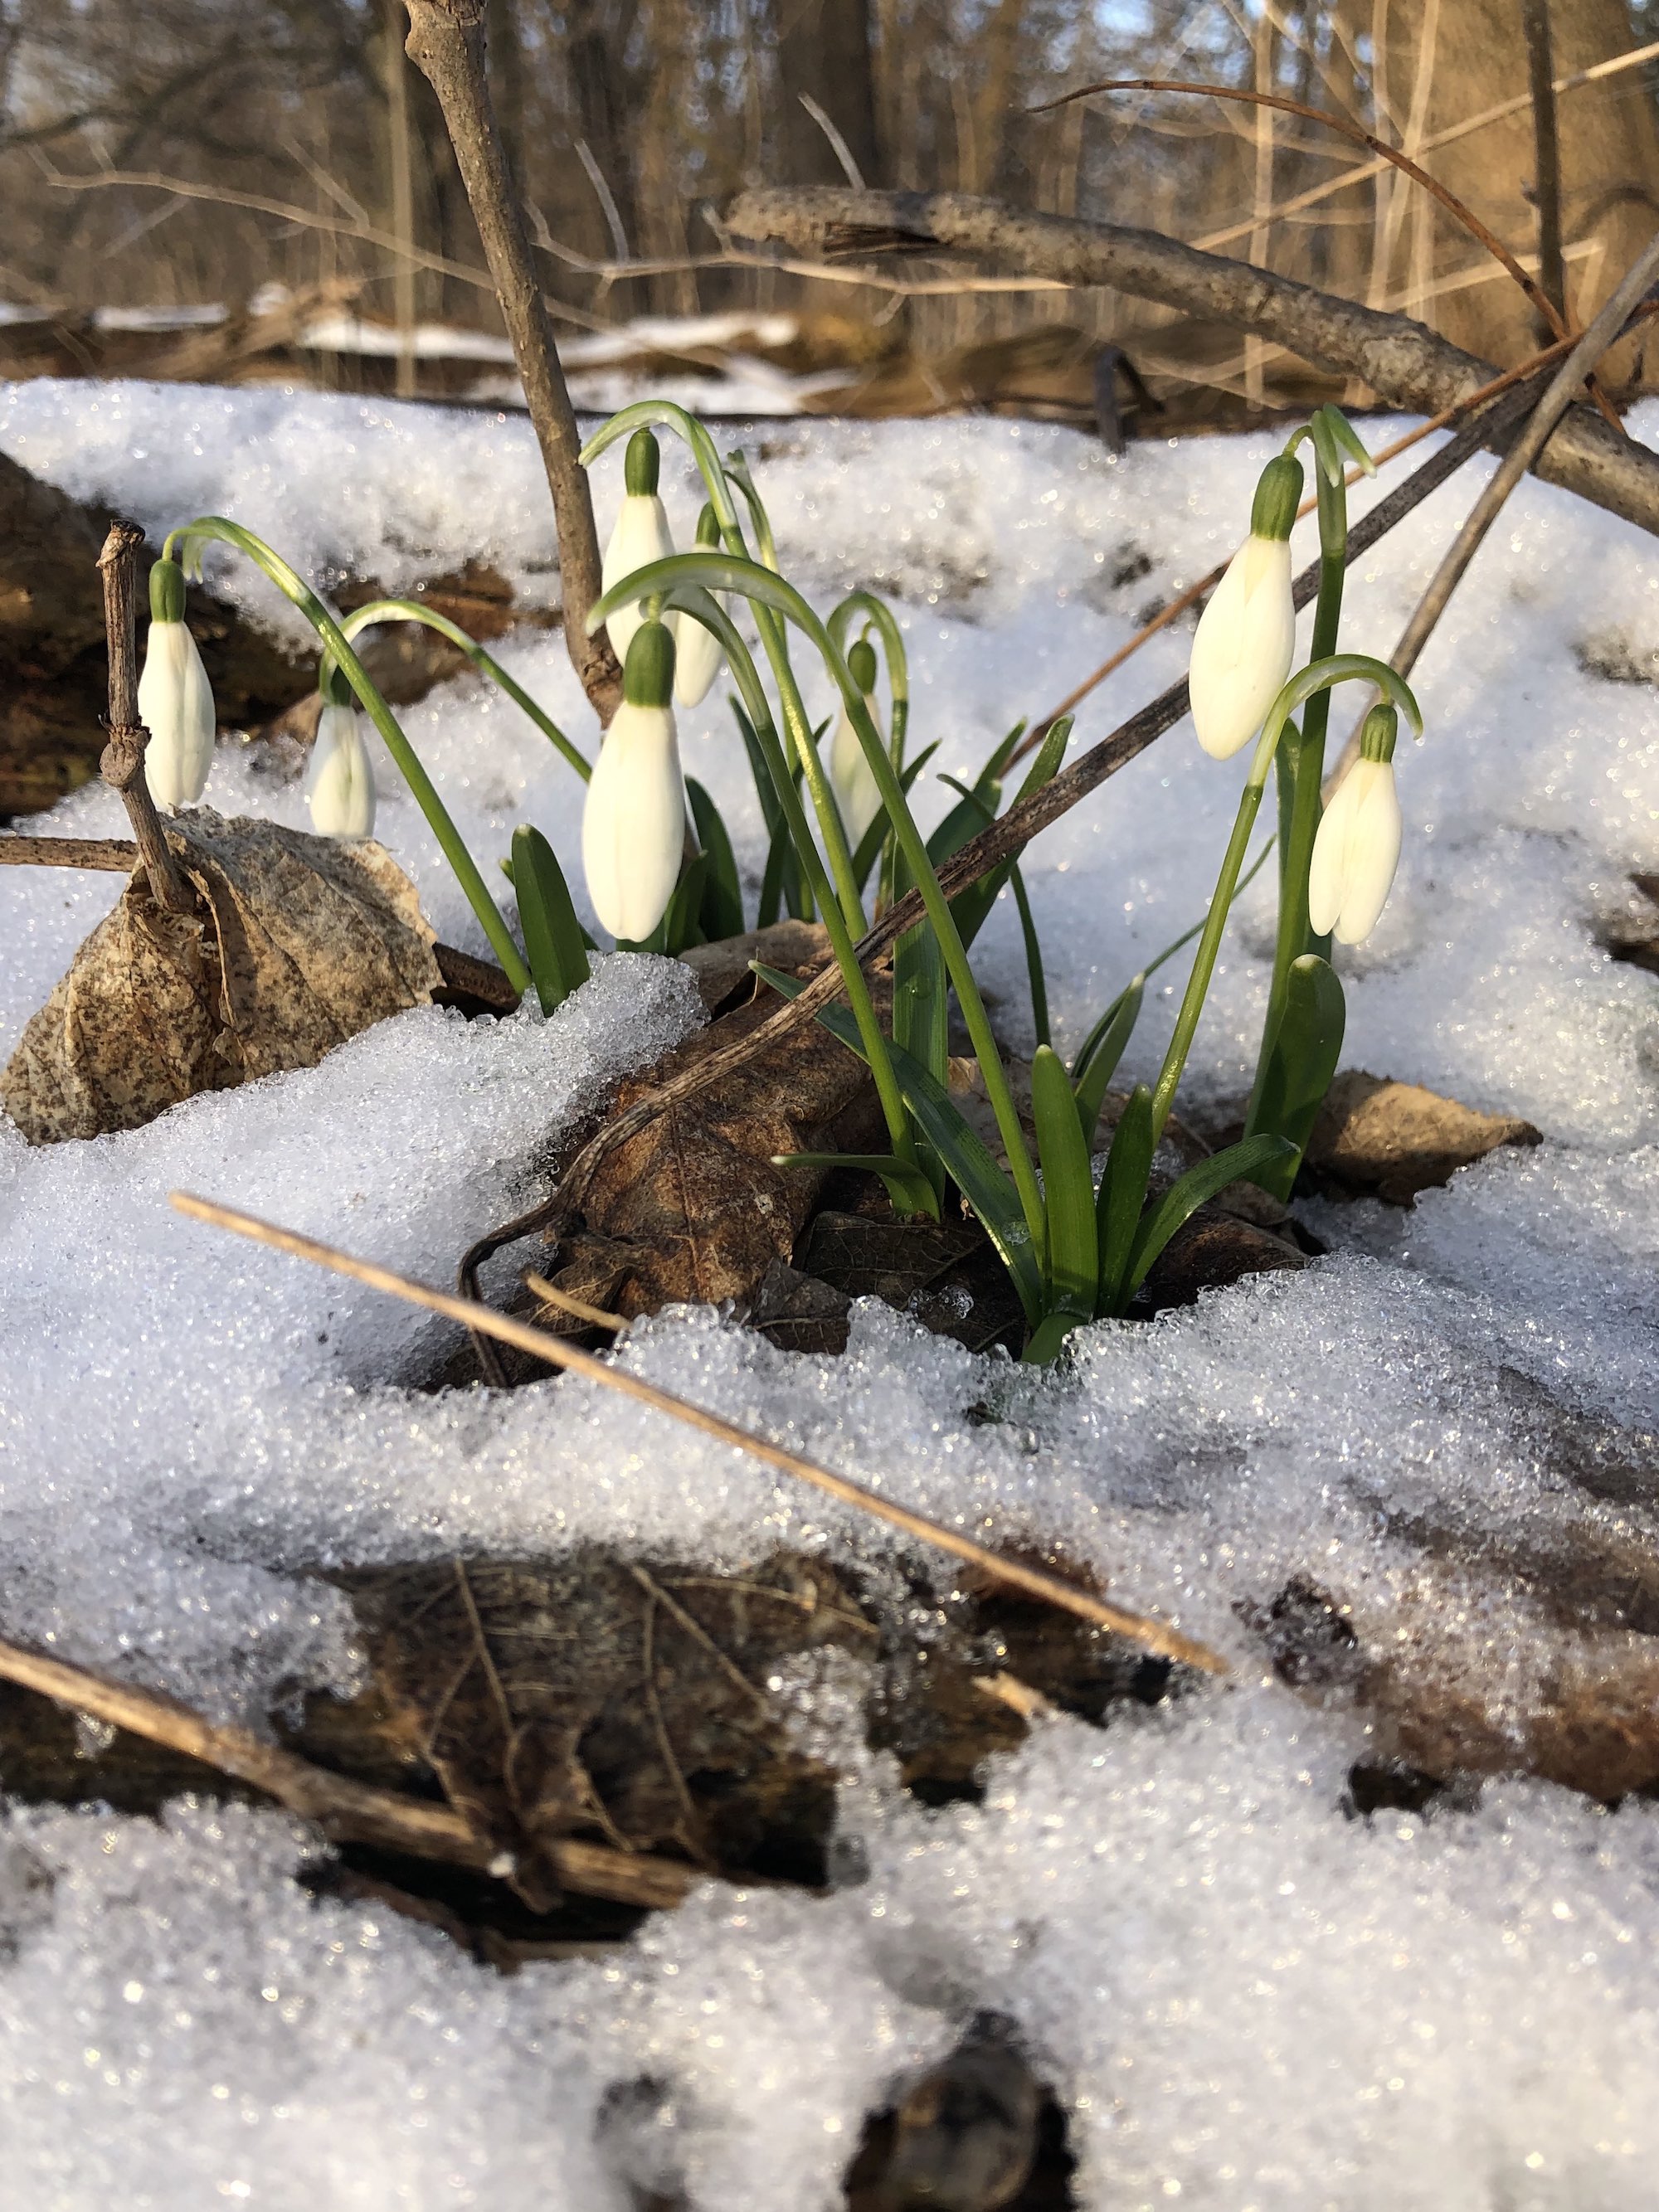 Snowdrops emerging in Madison Wisconsin along Arbor Drive on March1 18, 2021.